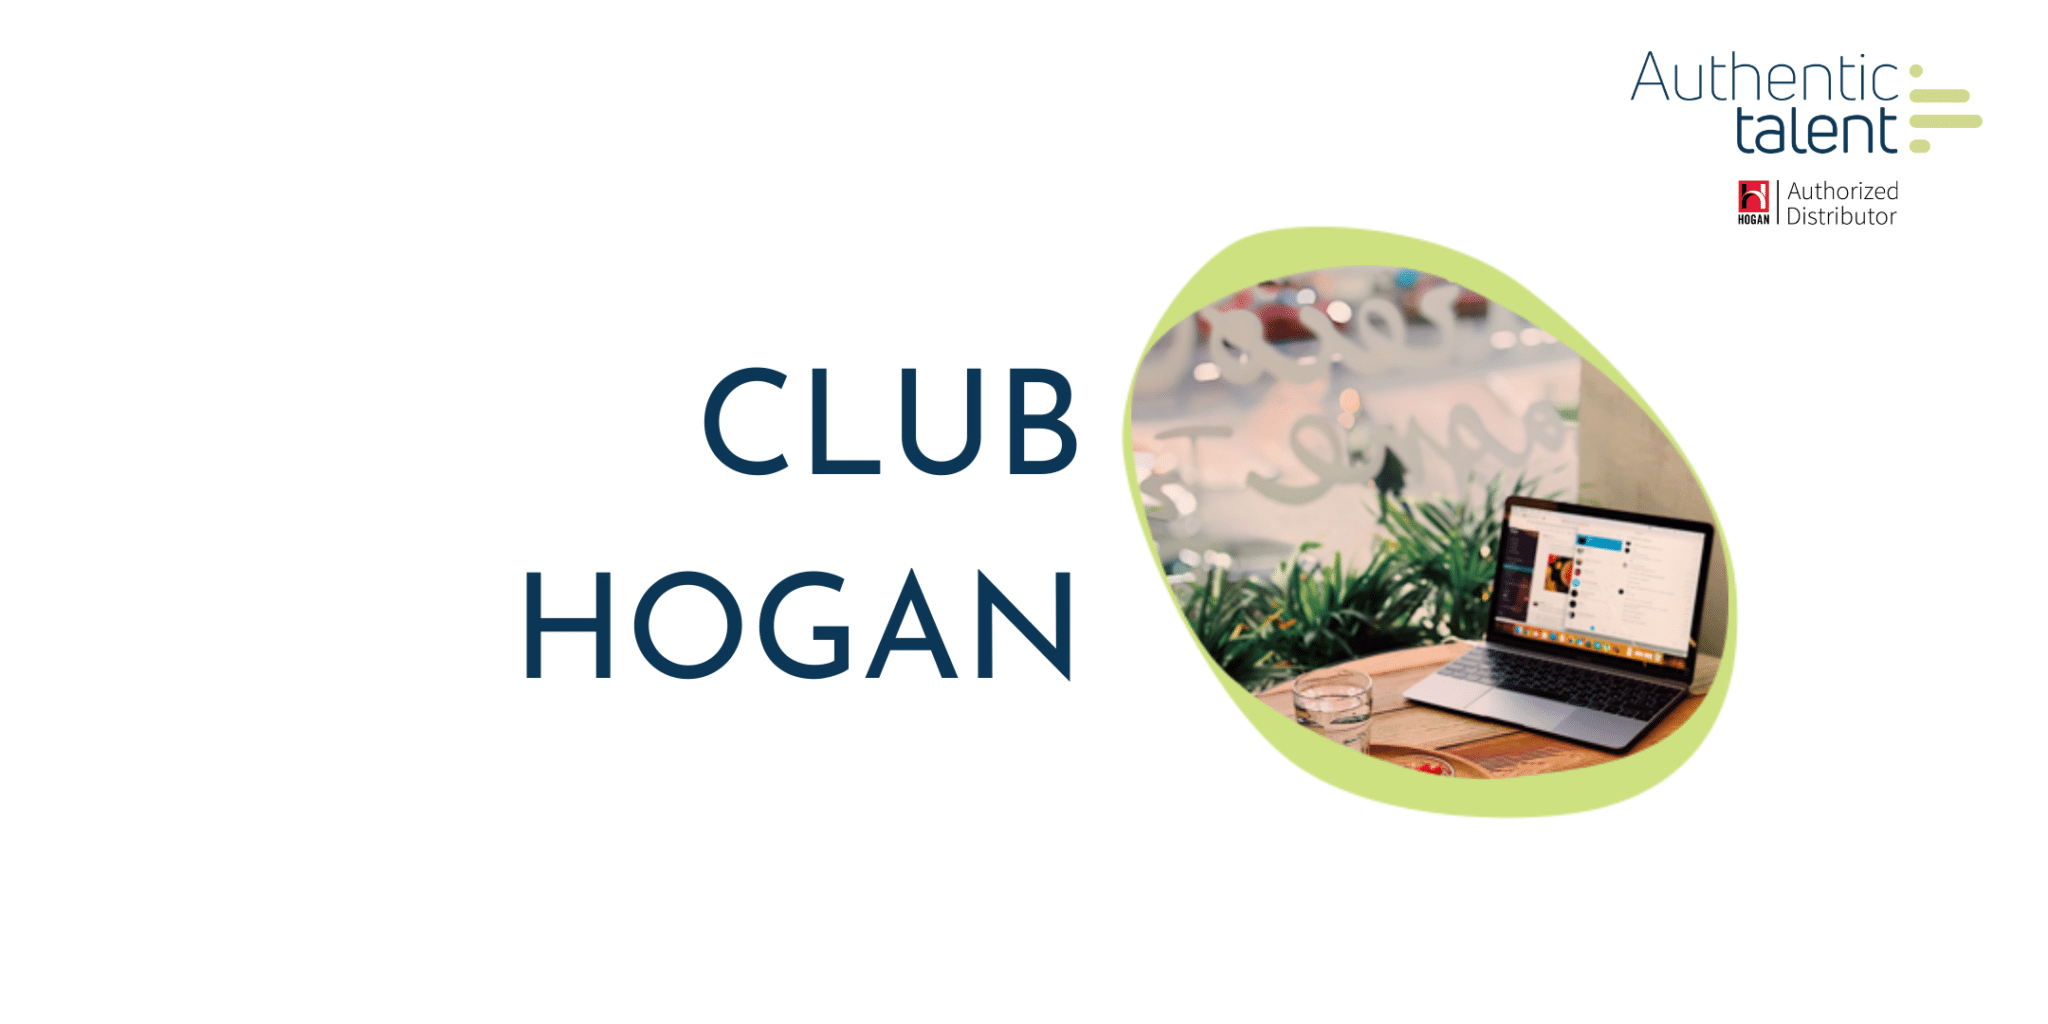 Club Hogan – Does personality change over time?